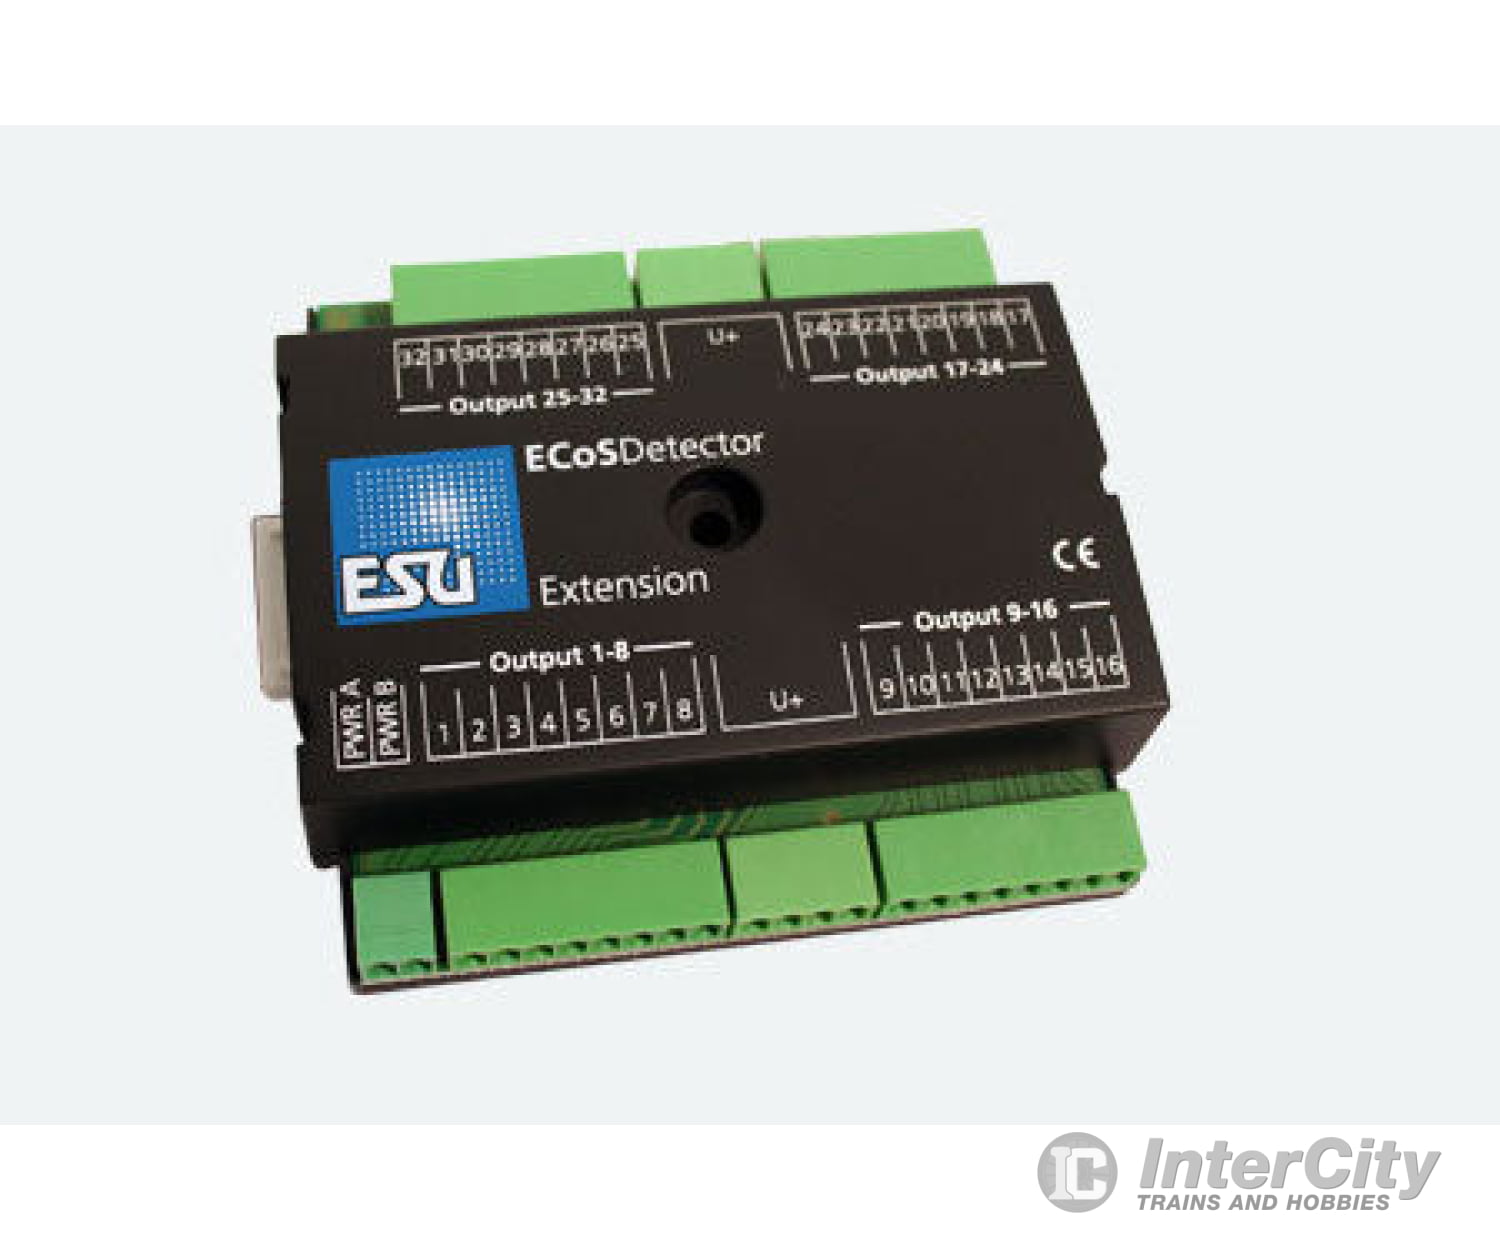 Esu 50095 Ecosdetector Extension. 32 Digital Outputs 100Ma For Little Bulbs Or Leds Lighting Track